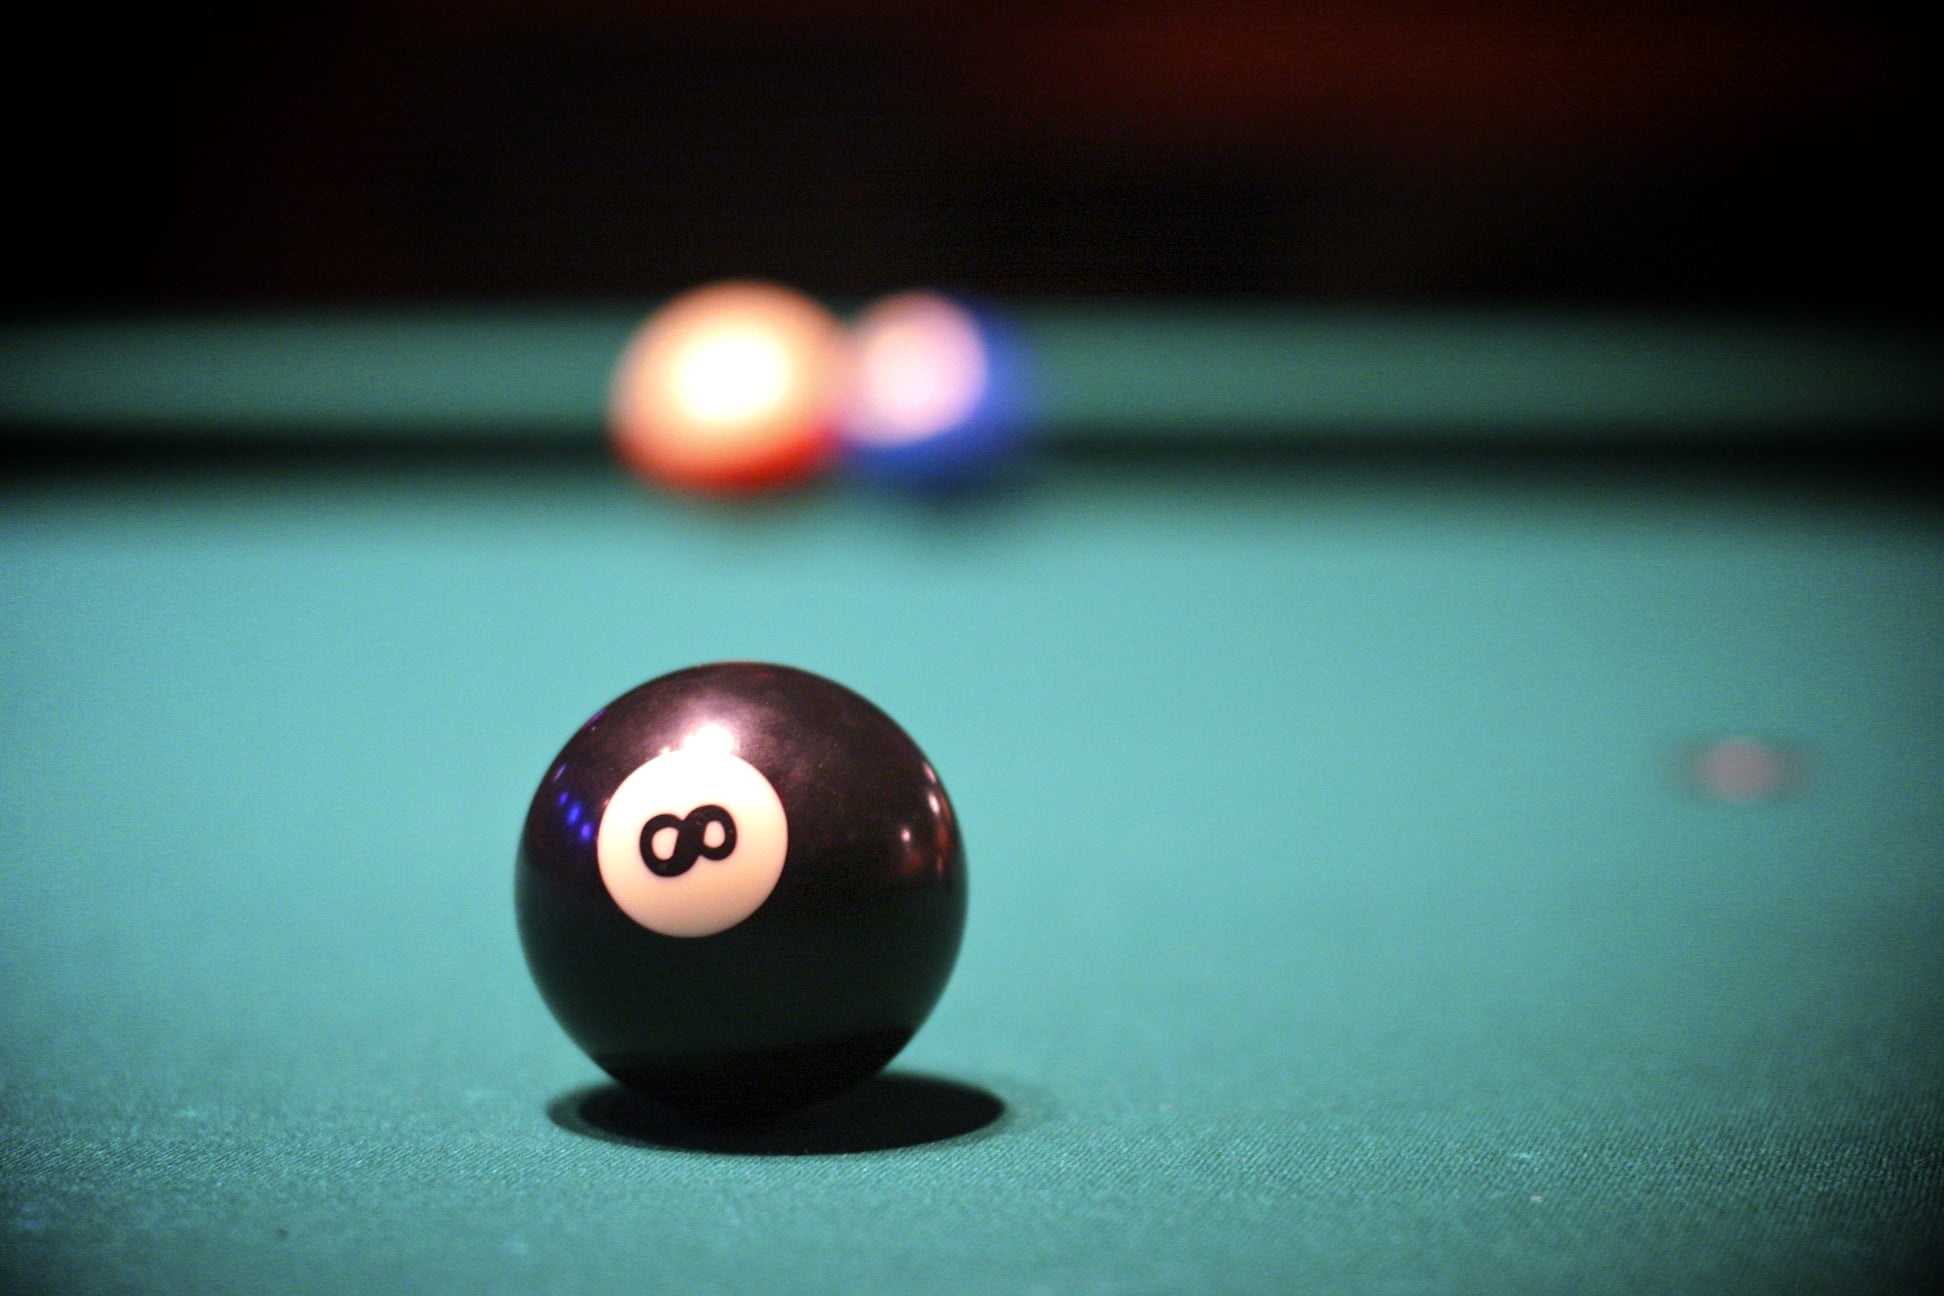 Billiards: Pocket billiards, The solid black object ball, The symbol of the eight-ball pool game. 1950x1300 HD Wallpaper.